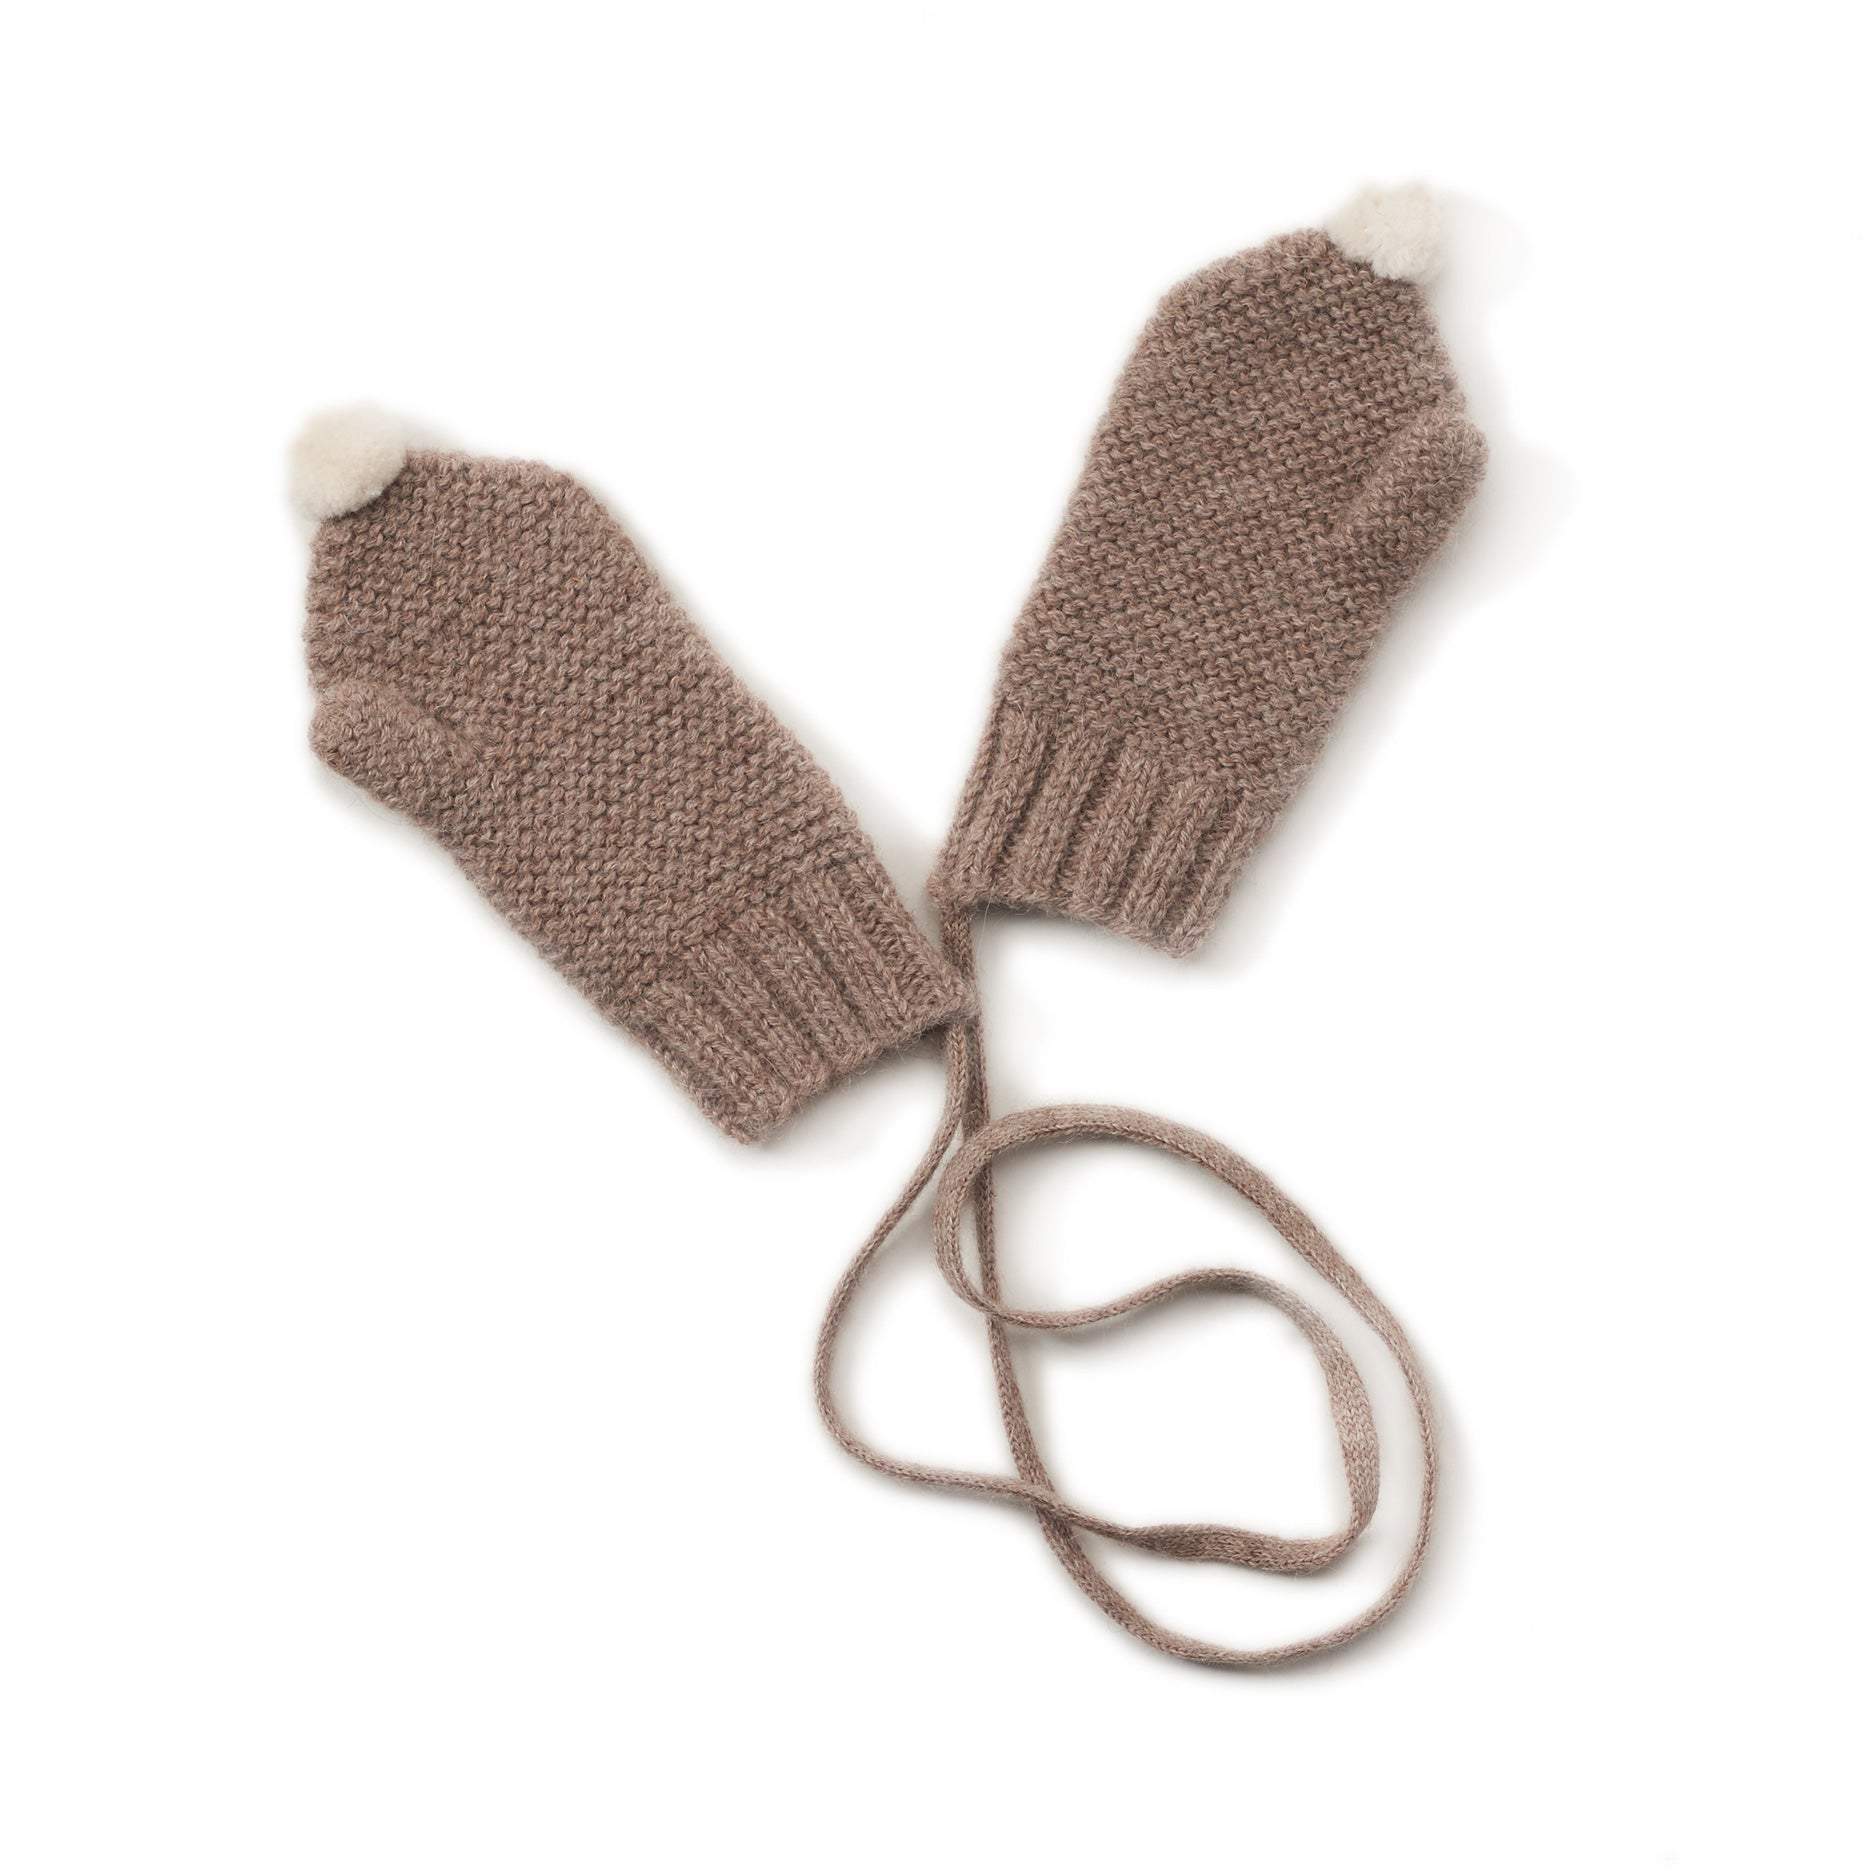 dark tan mittens with white pom atop, cord for inside sleefves, handmade with 100% melanged alpaca